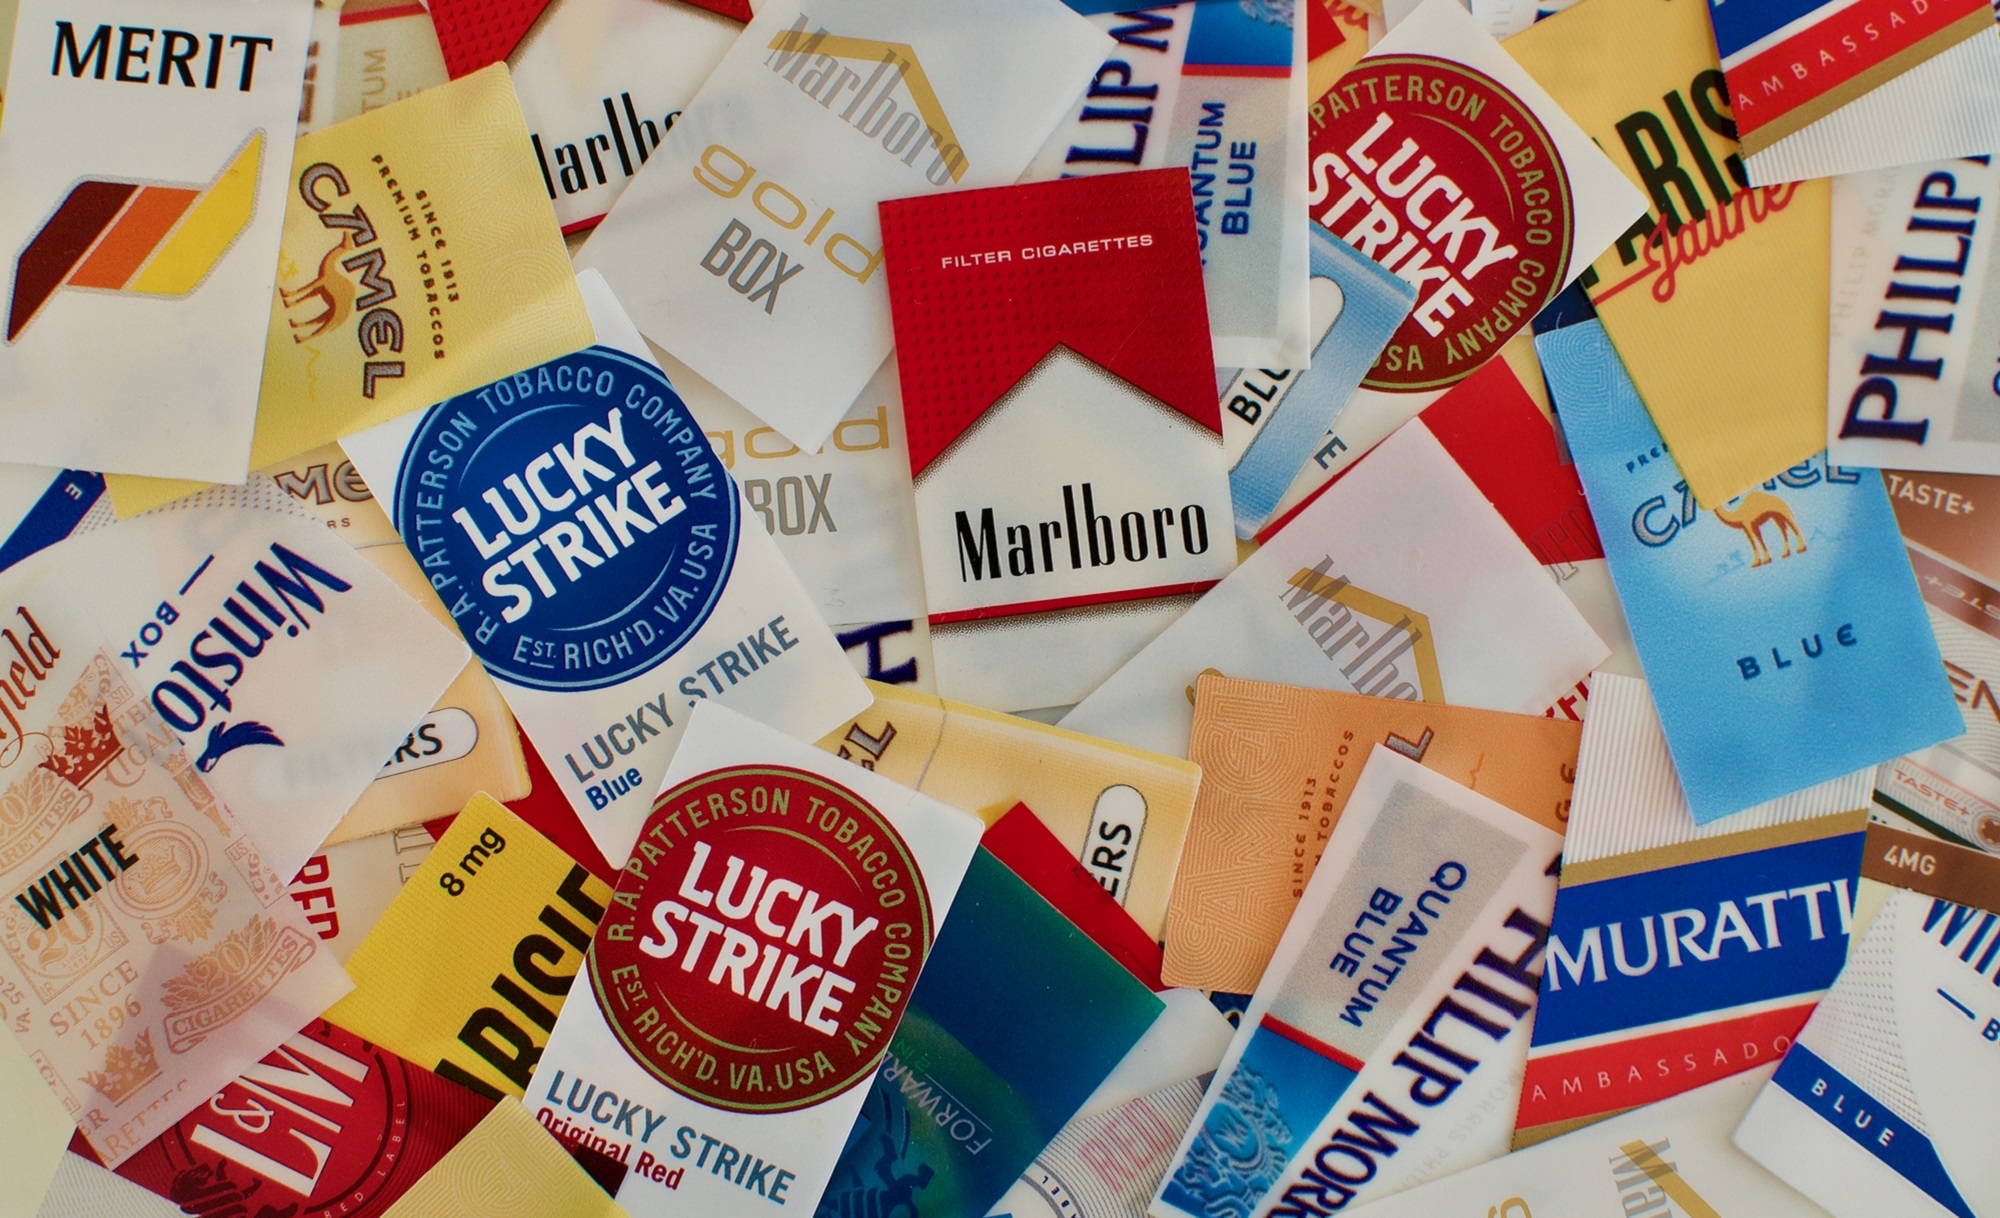 US smoking rates show decline in cigarette smoking